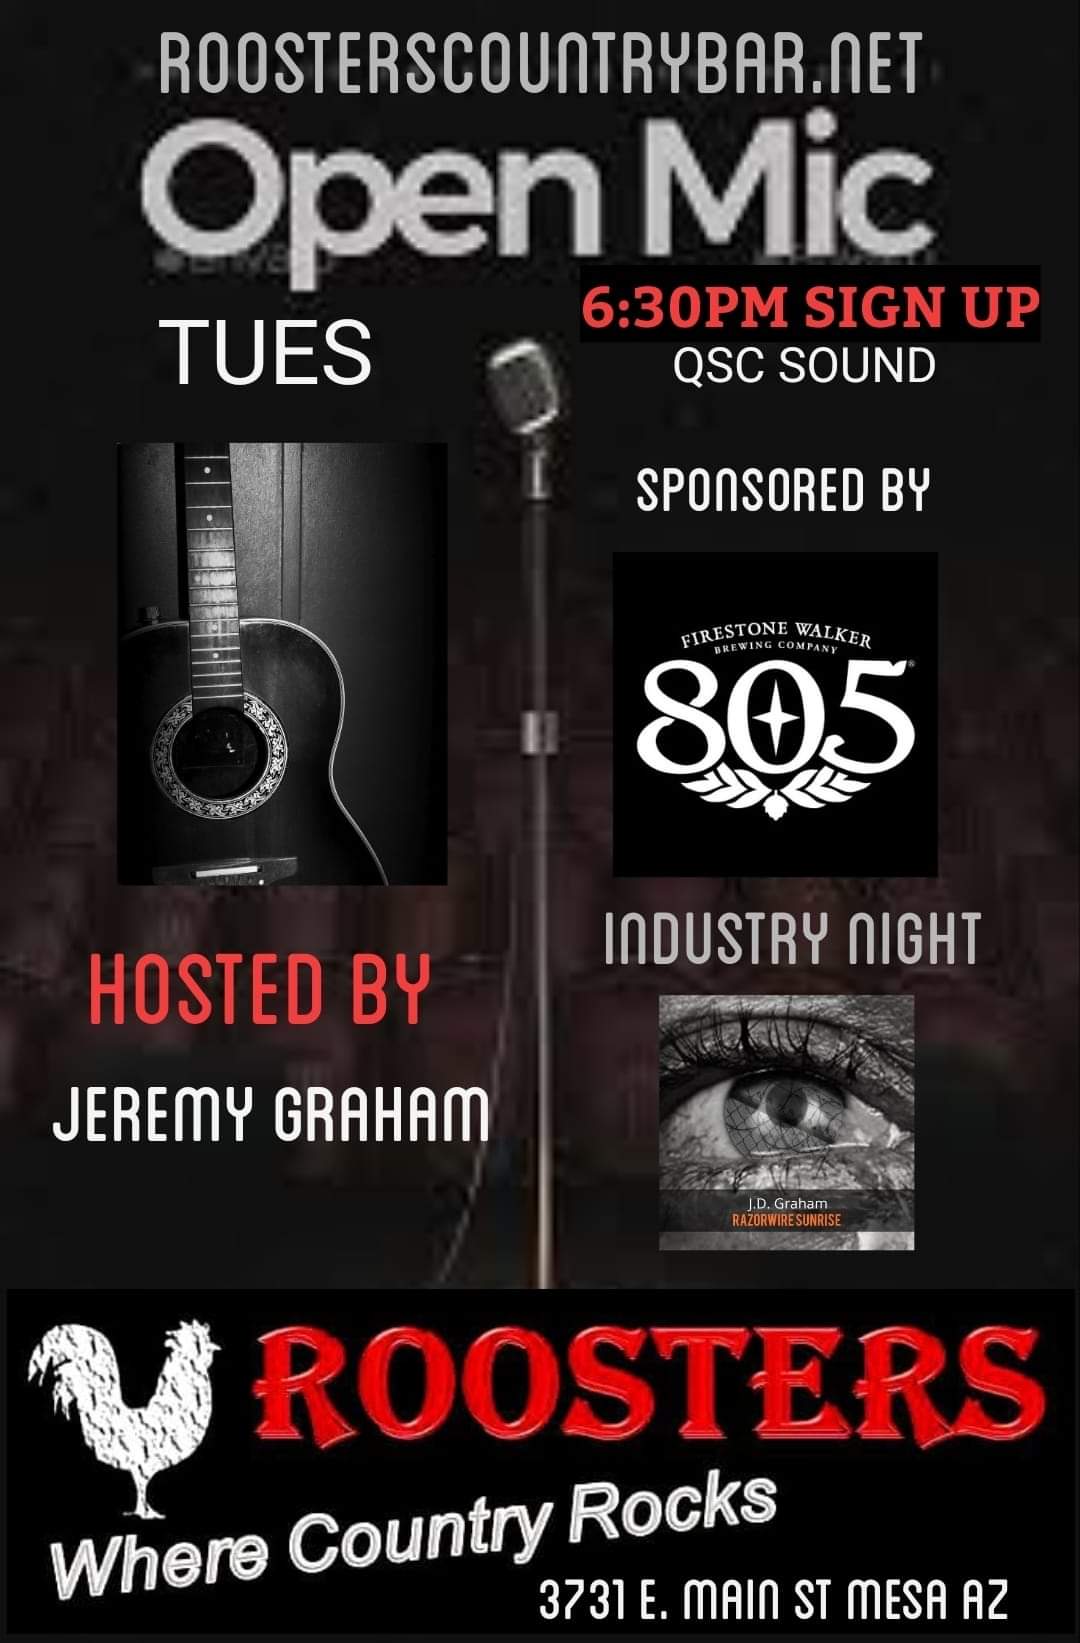 Open Mic Every Tuesday Hosted by Jeremy Graham